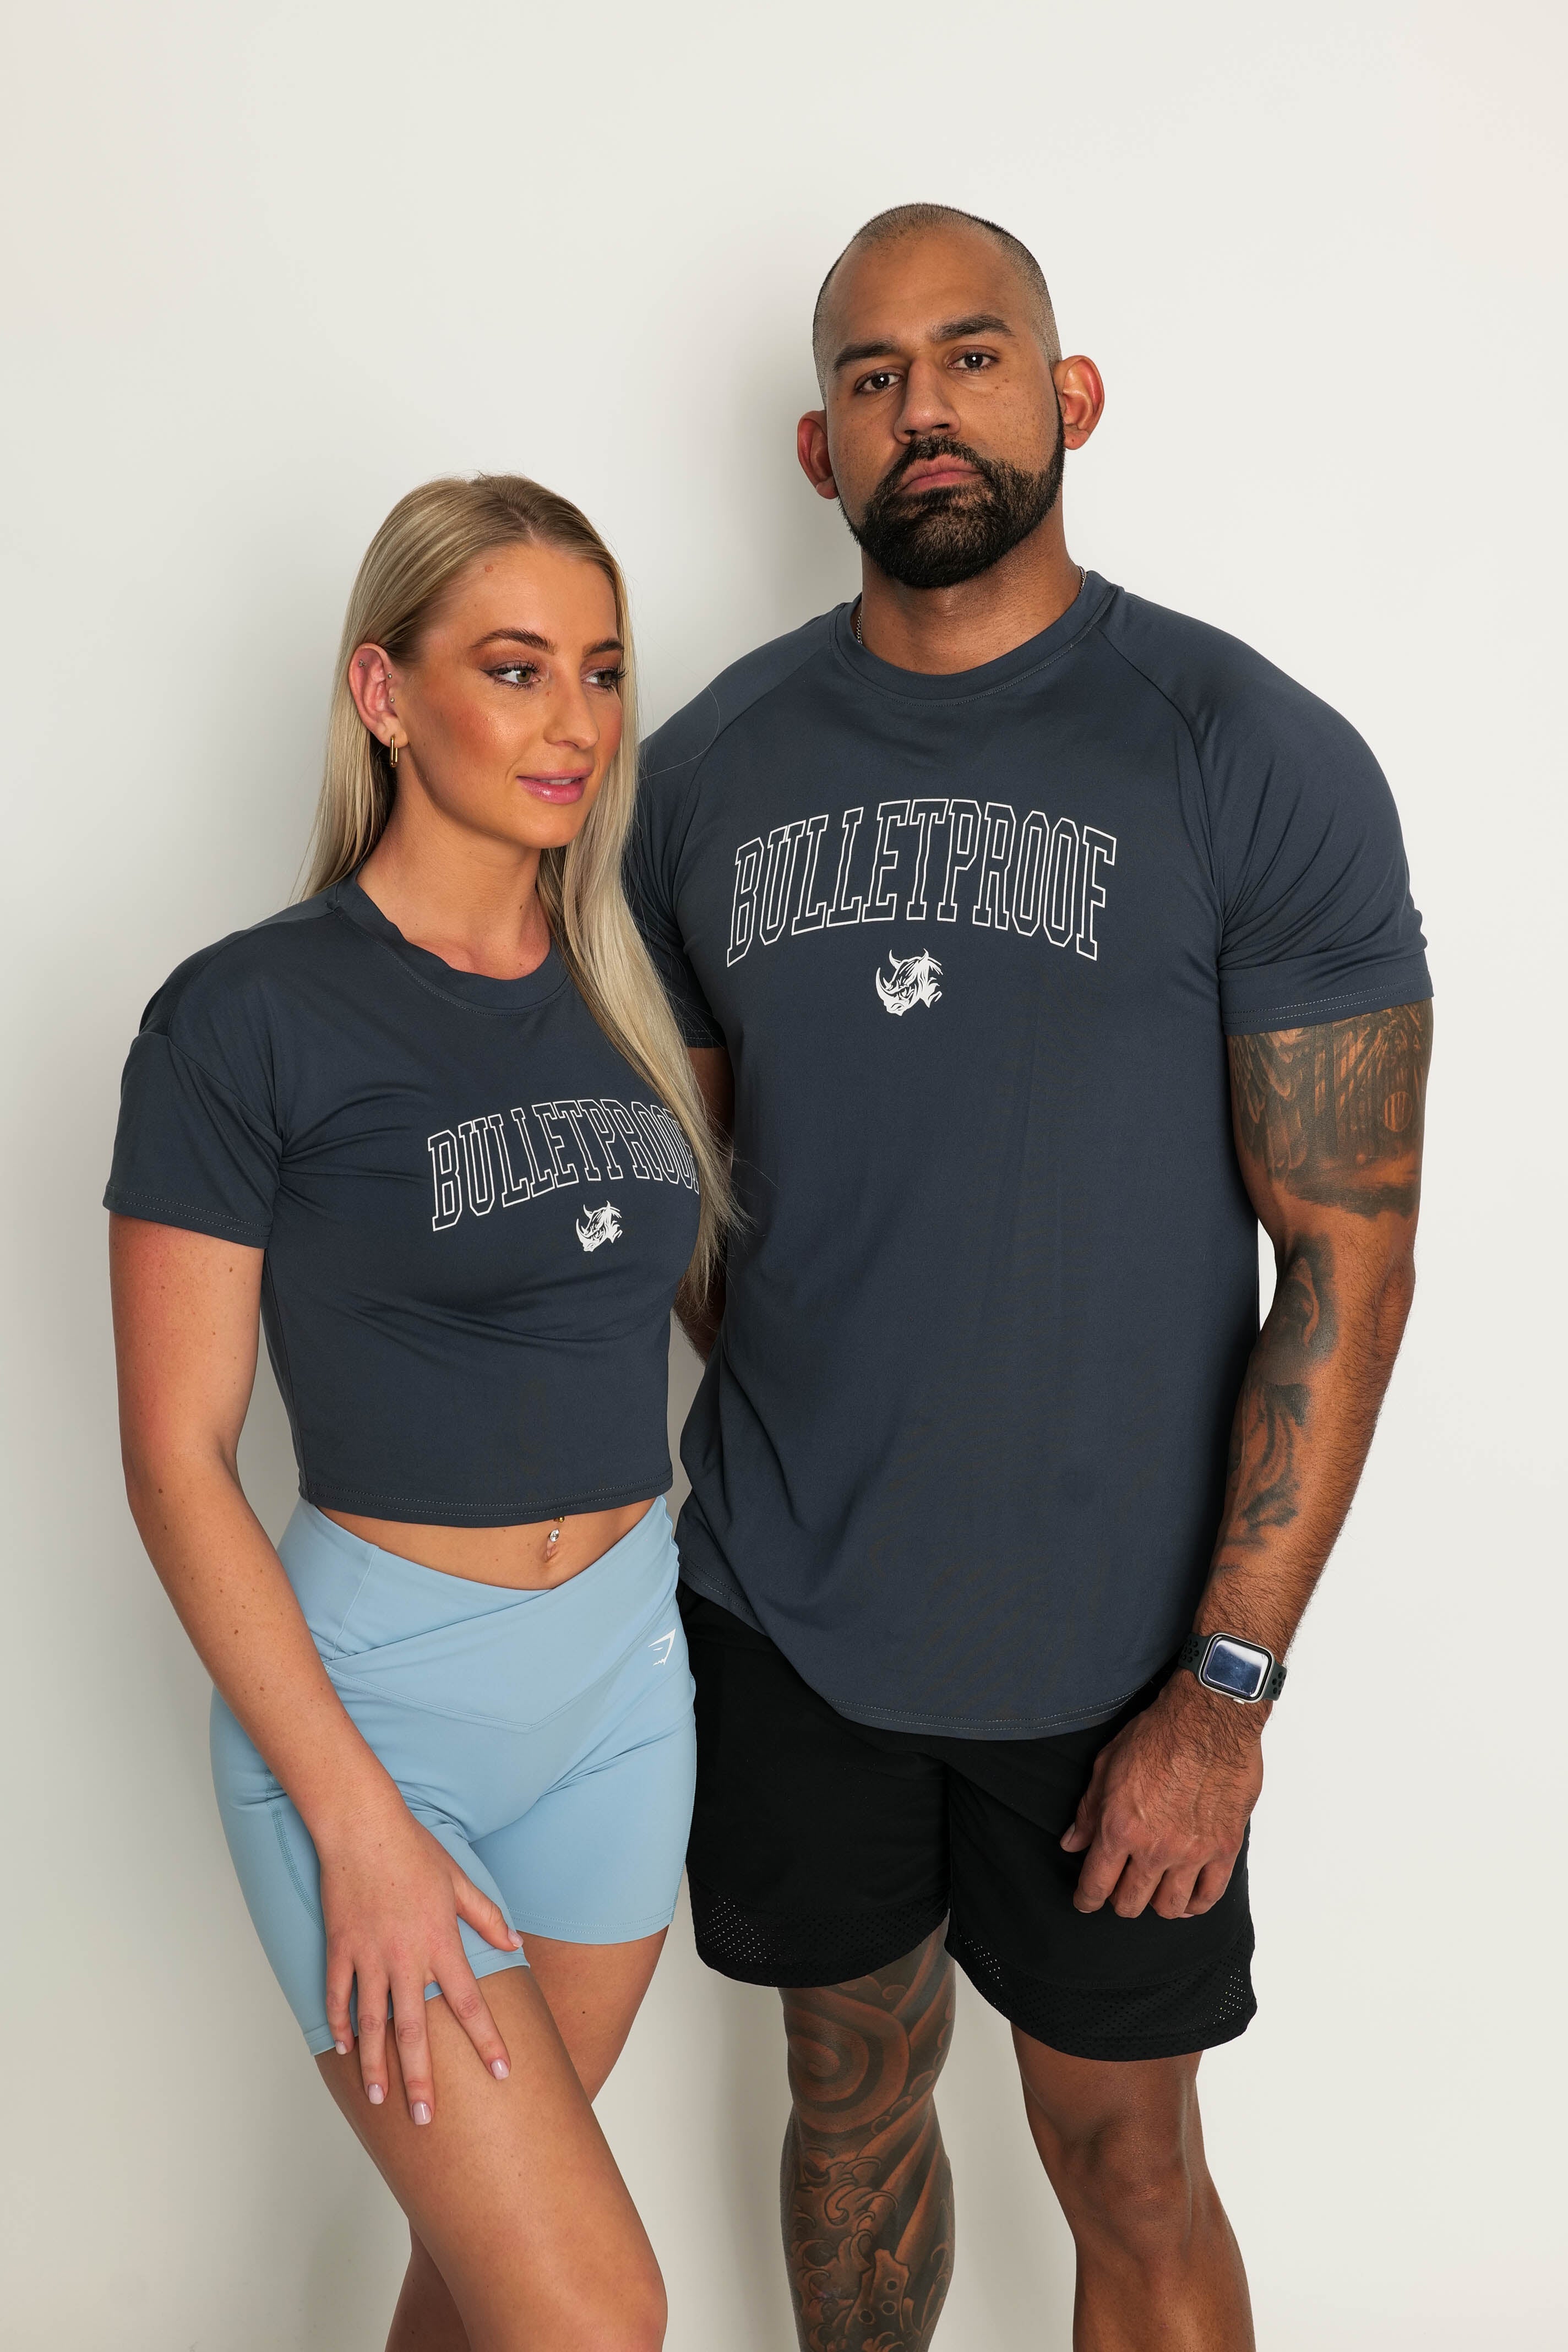 T-SHIRT - Bulletproof Unity: Built by Us for Us